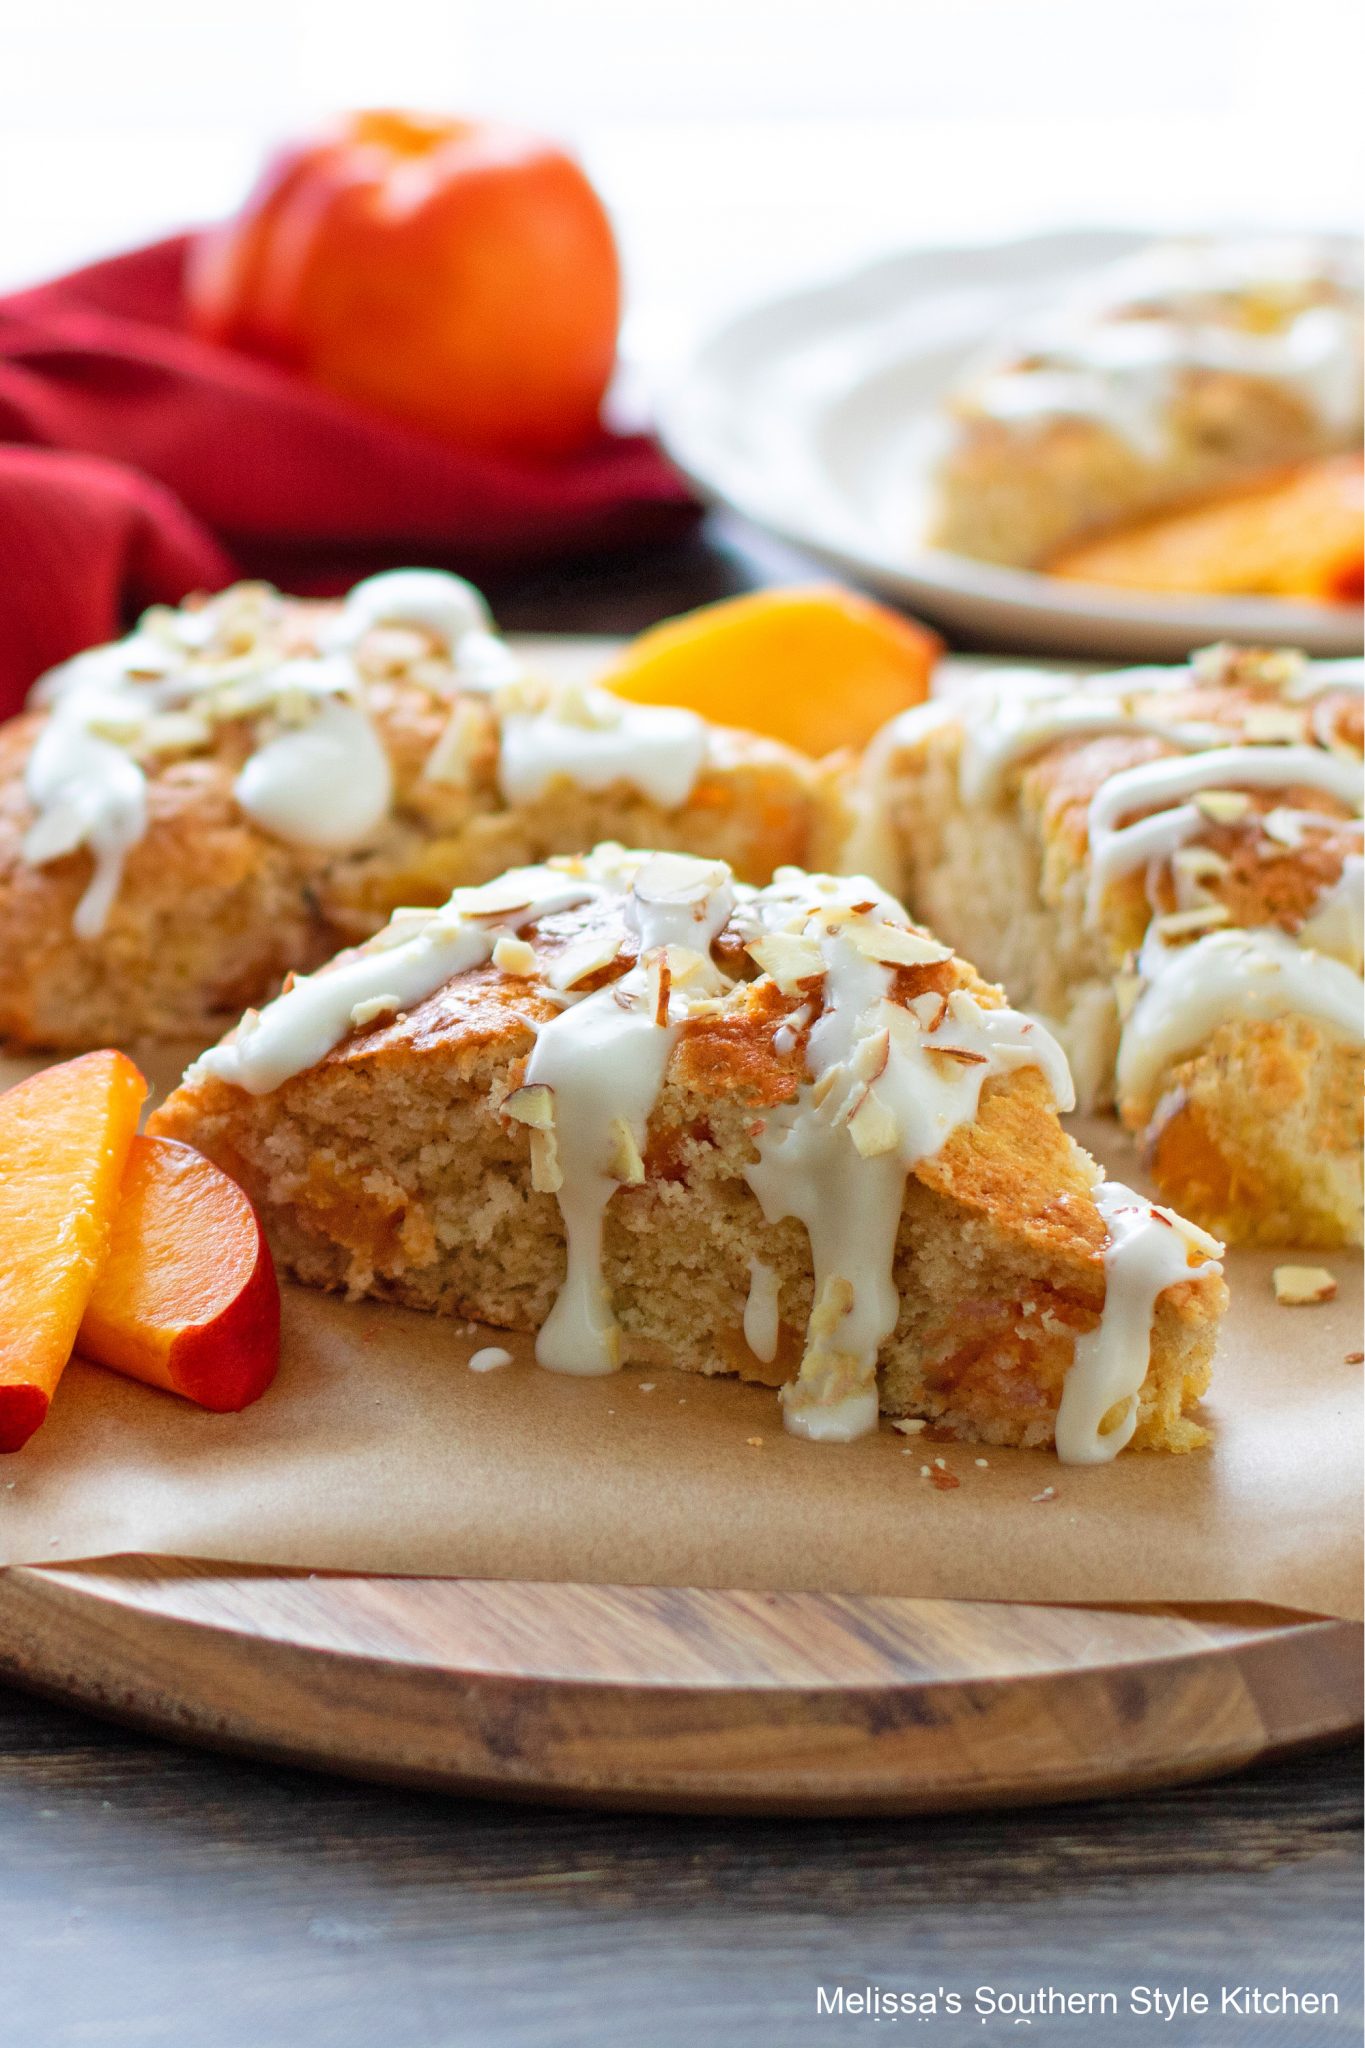 Southern style Peach Scones